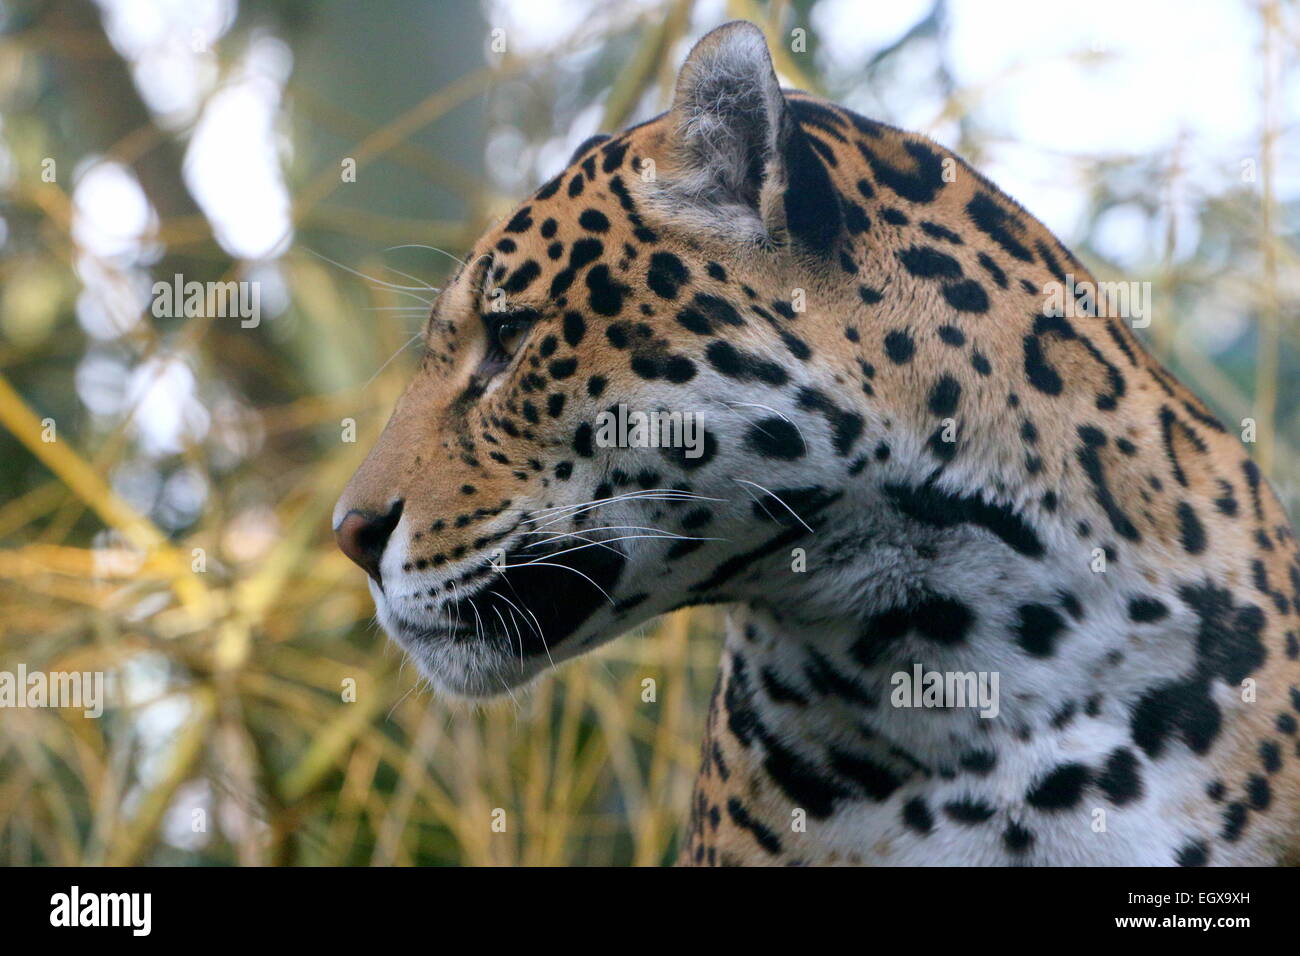 Female South American  Jaguar (Panthera onca), close-up of the head seen in profile Stock Photo